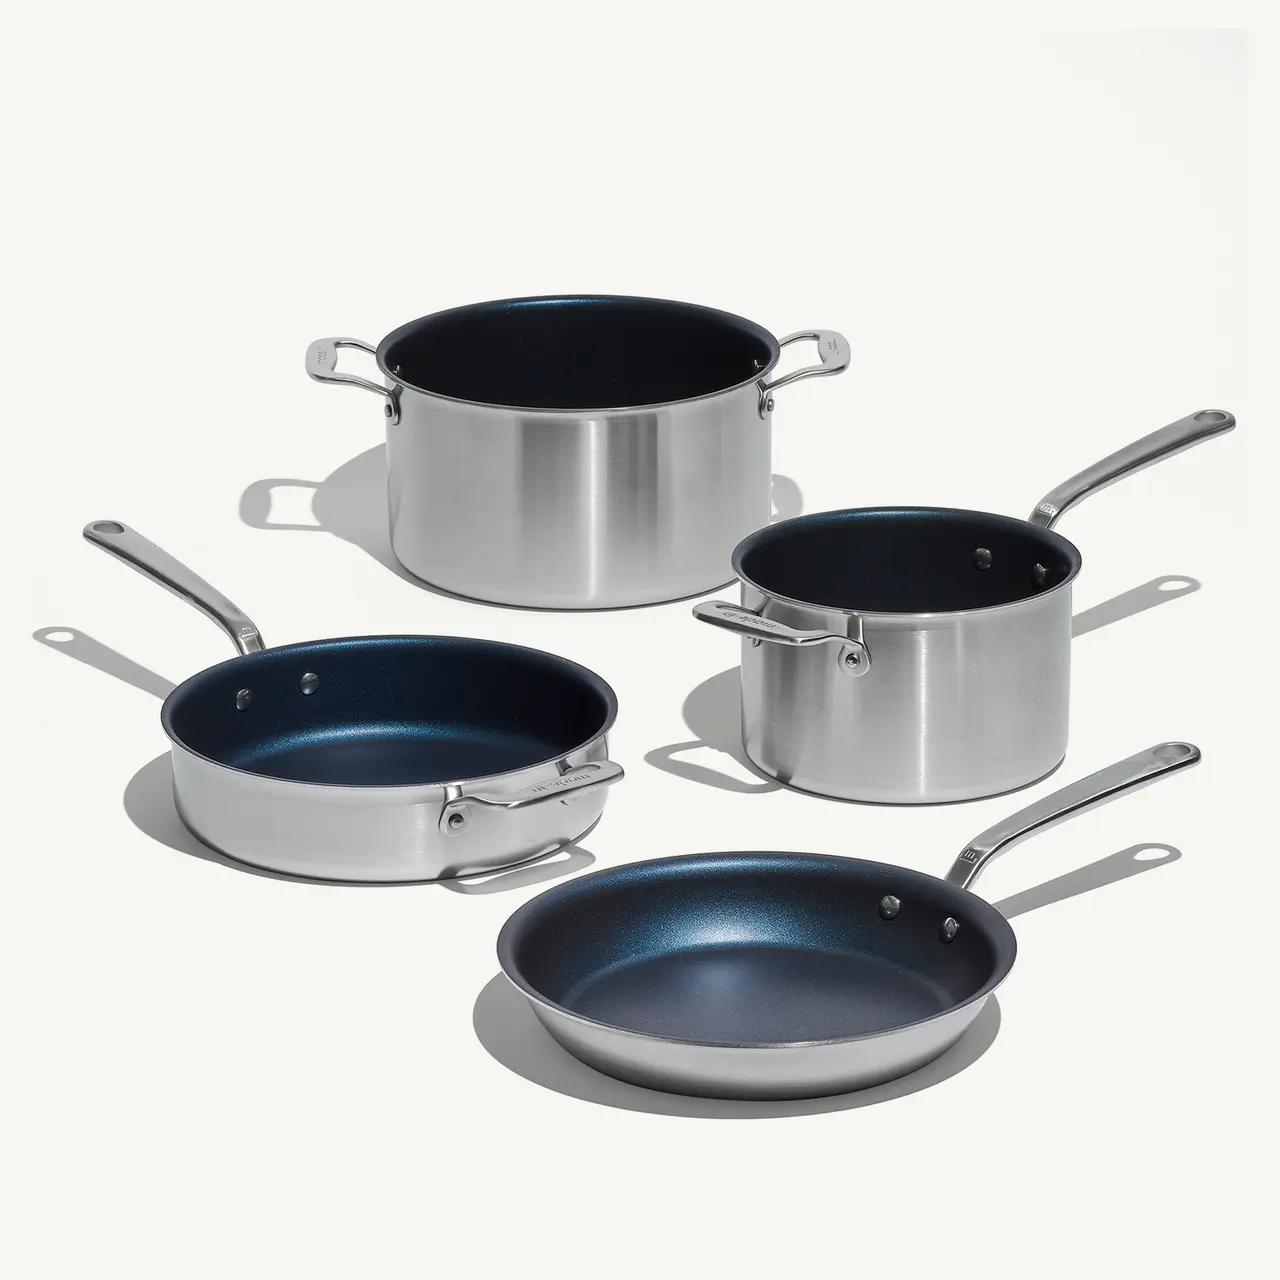 A set of stainless steel cookware, including two frying pans and two pots with blue non-stick interiors, is arranged on a light background.